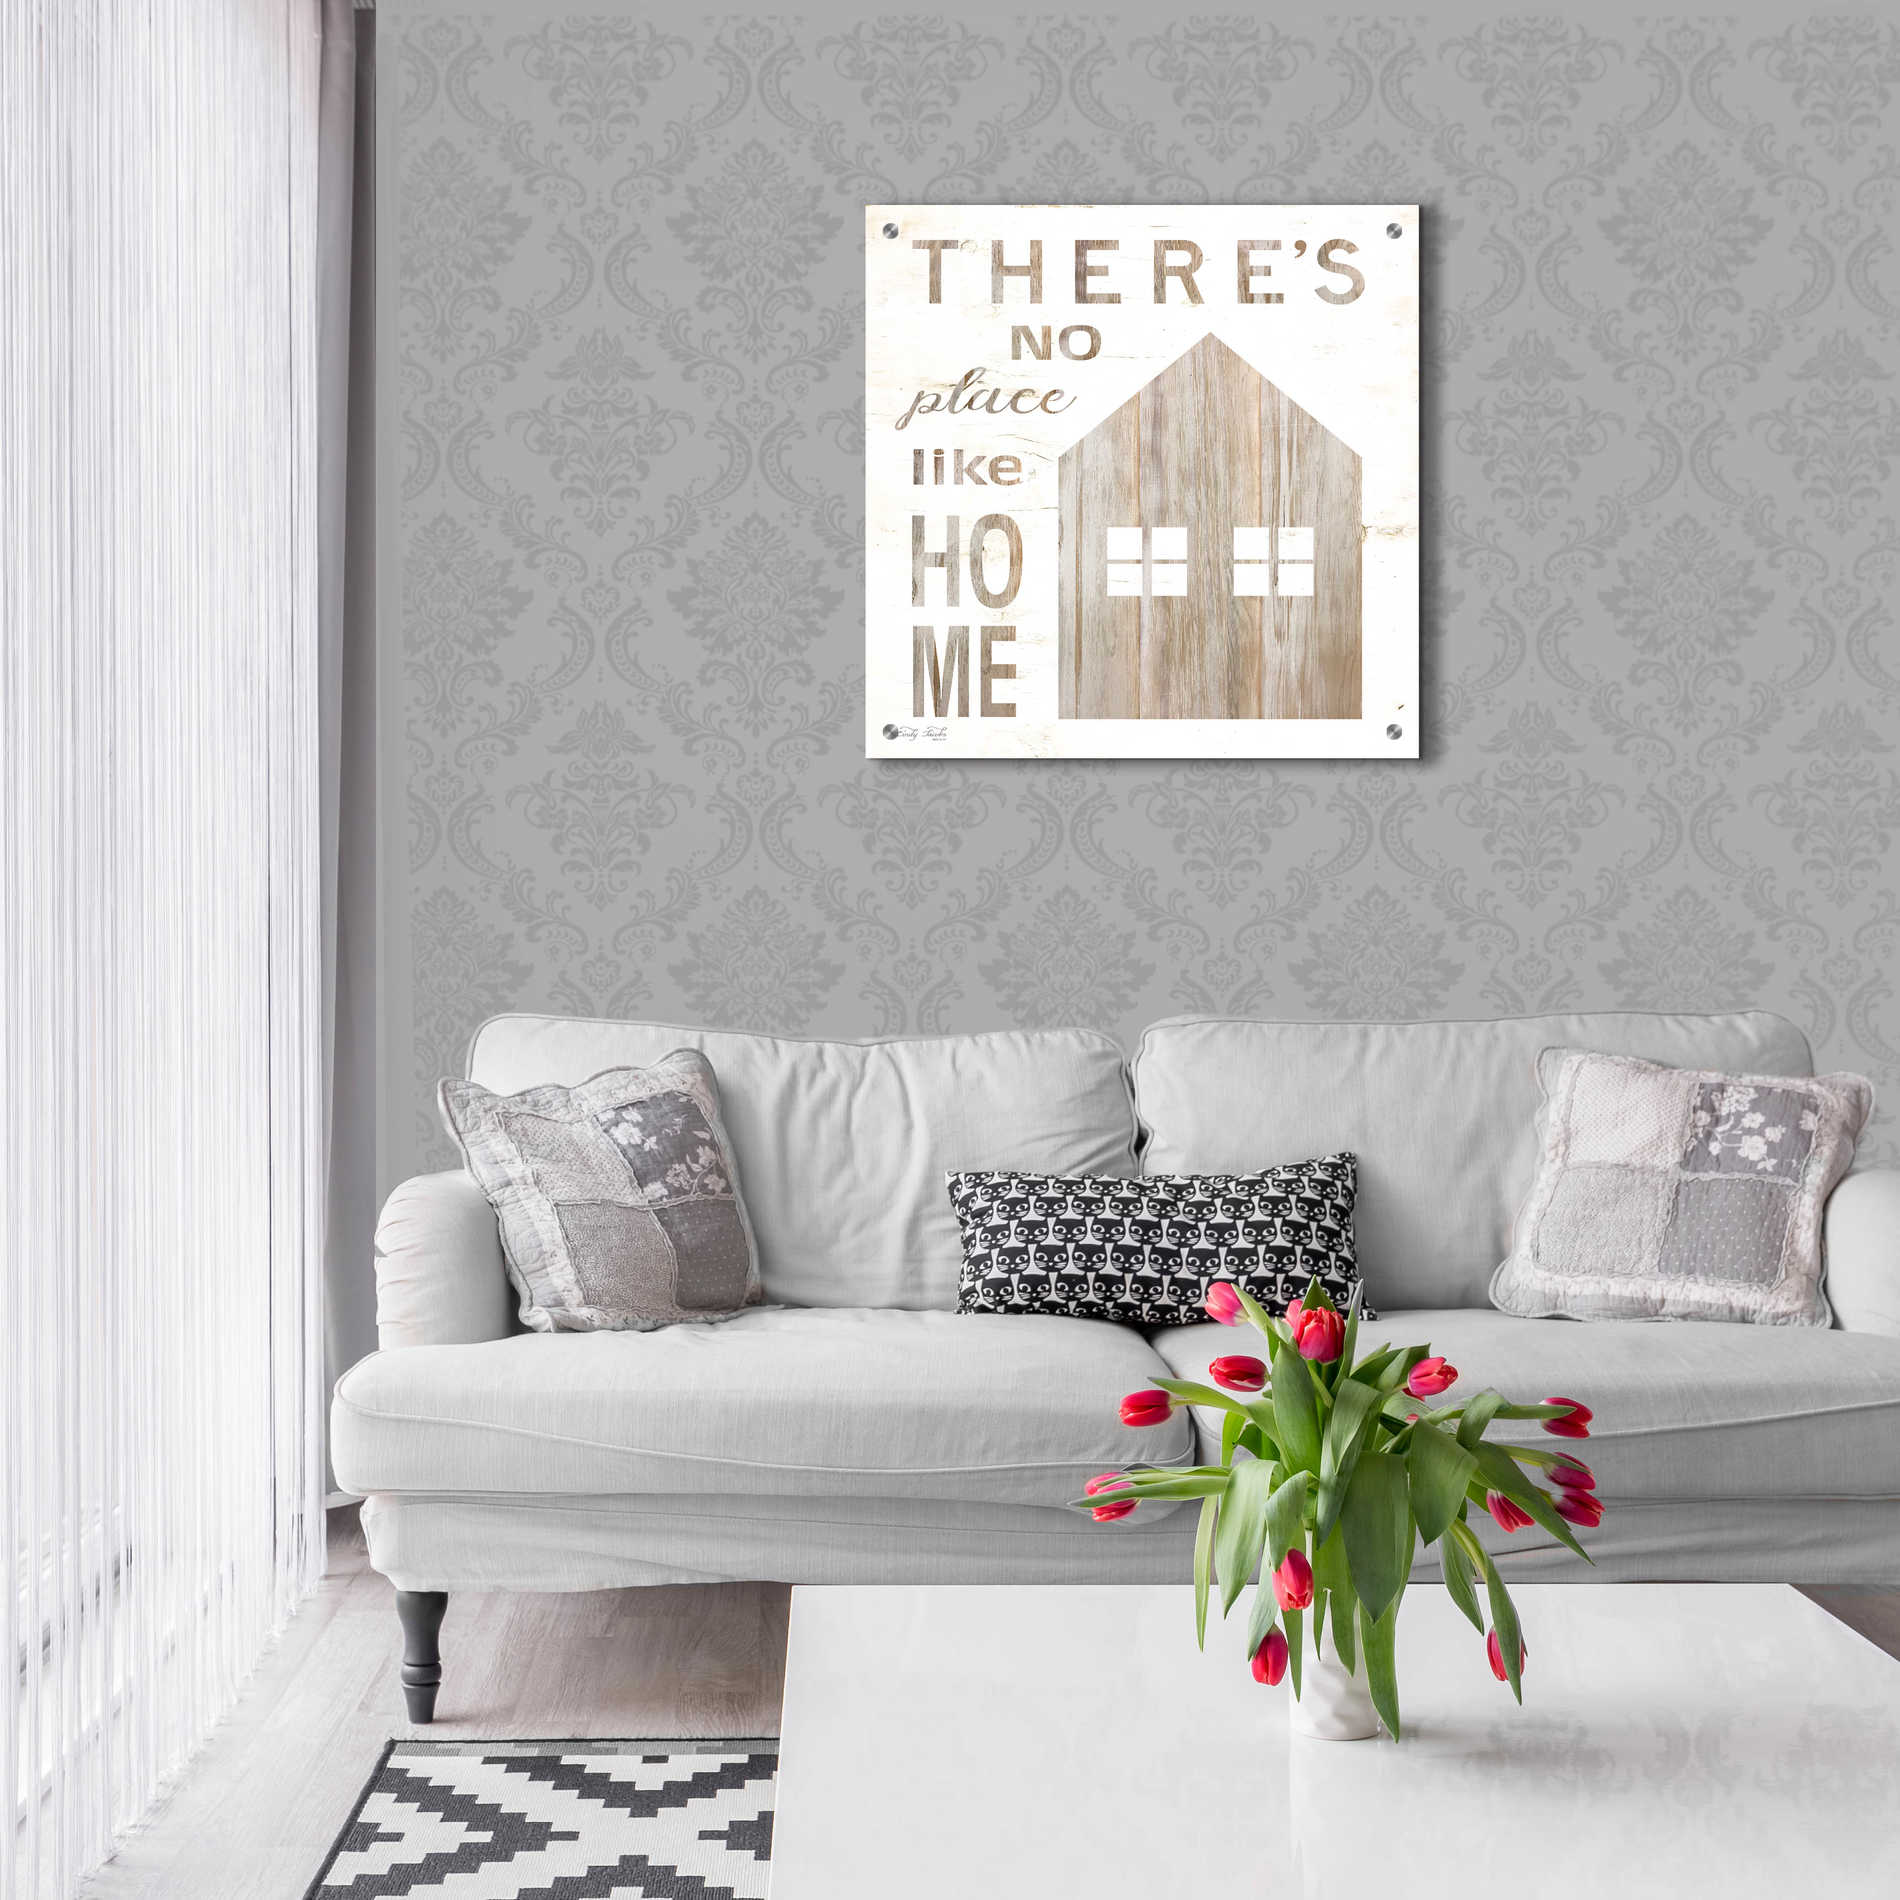 Epic Art 'There's No Place Like Home' by Cindy Jacobs, Acrylic Glass Wall Art,24x24